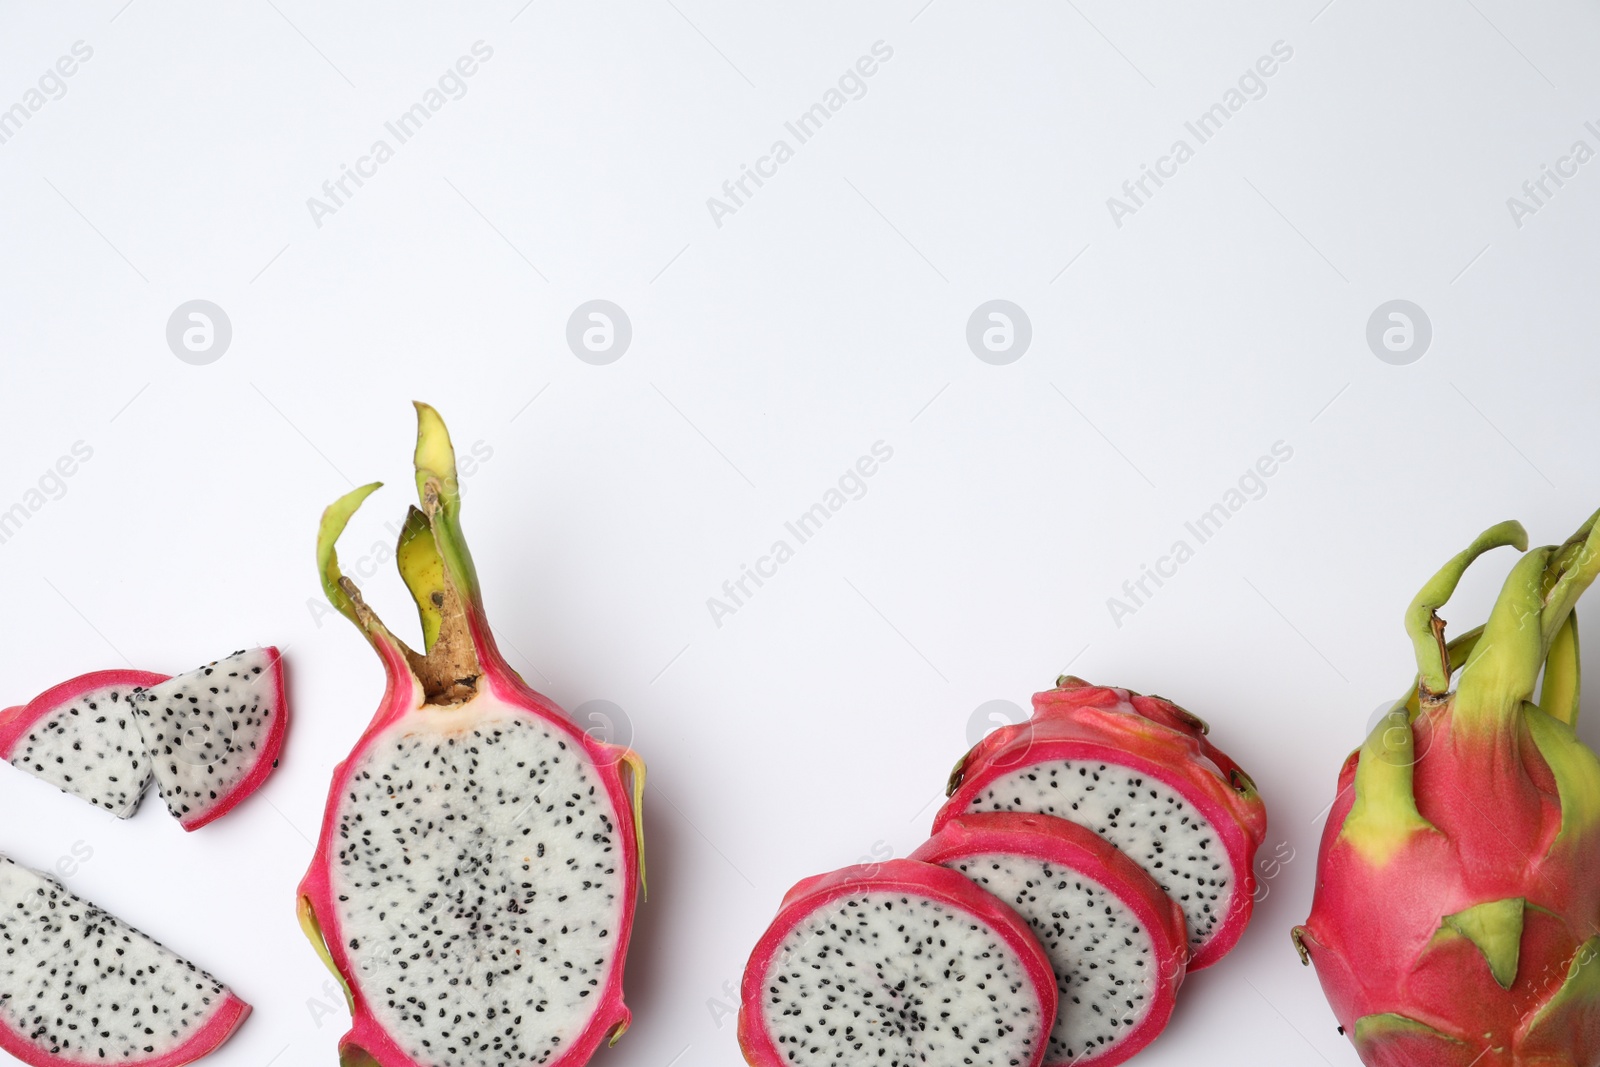 Photo of Delicious cut and whole dragon fruits (pitahaya) on white background, top view